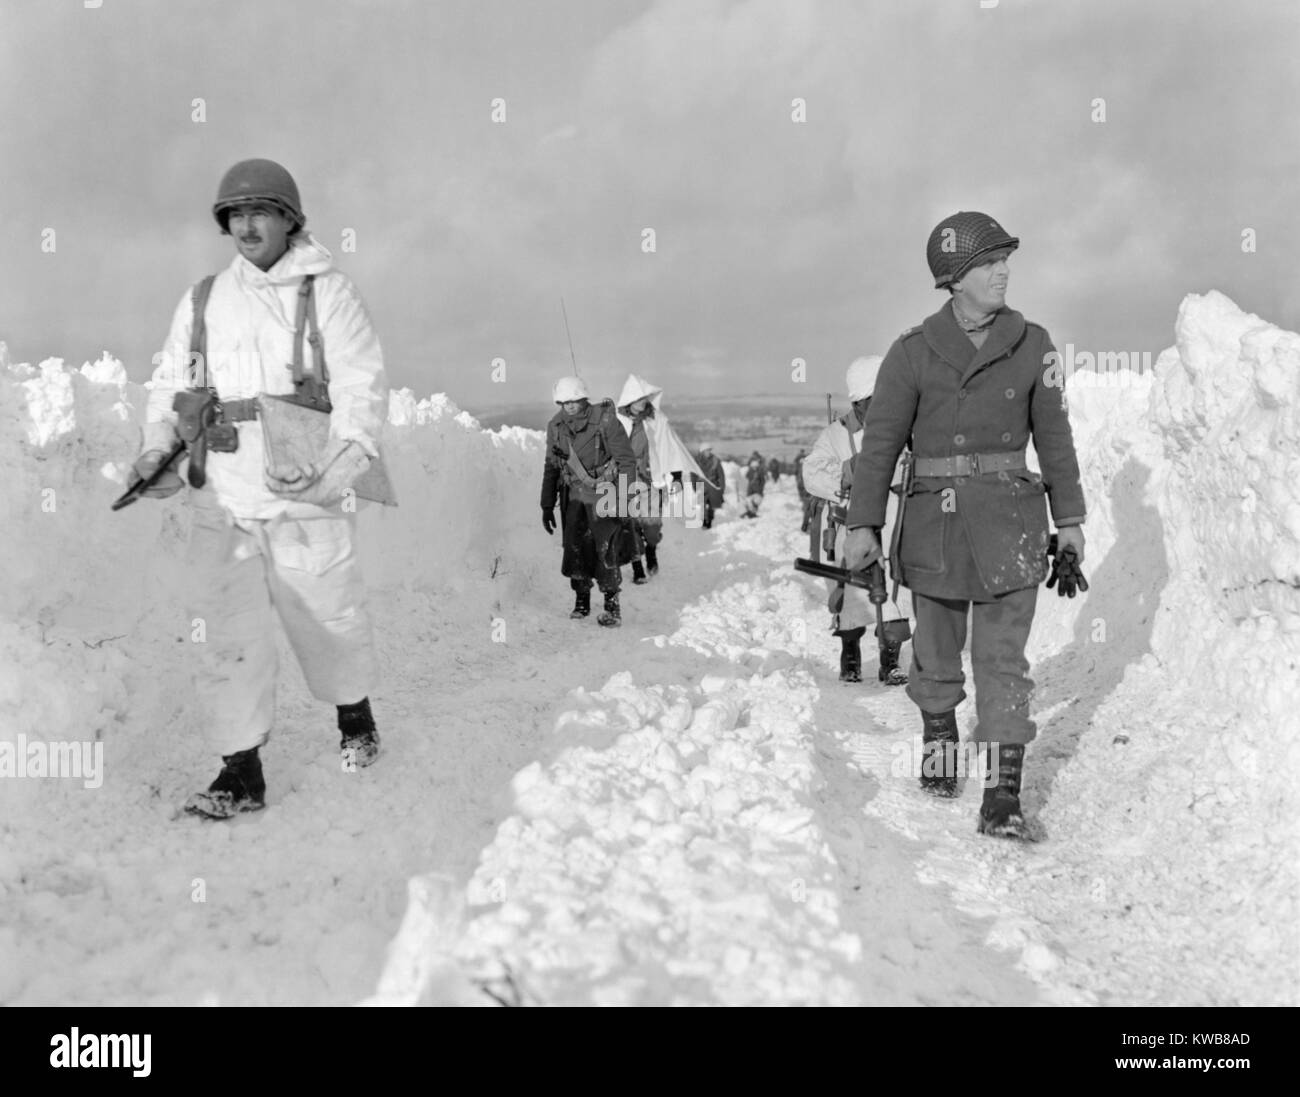 U.S. soldiers patrol on a path plowed through snow in the Ardennes during the Battle of the Bulge. Some infantry men have full white uniforms while others have only partial or no camouflage covering. Ca. Dec. 26, 1944 through Jan. 25, 1945. World War 2. (BSLOC 2014 10 93) Stock Photo